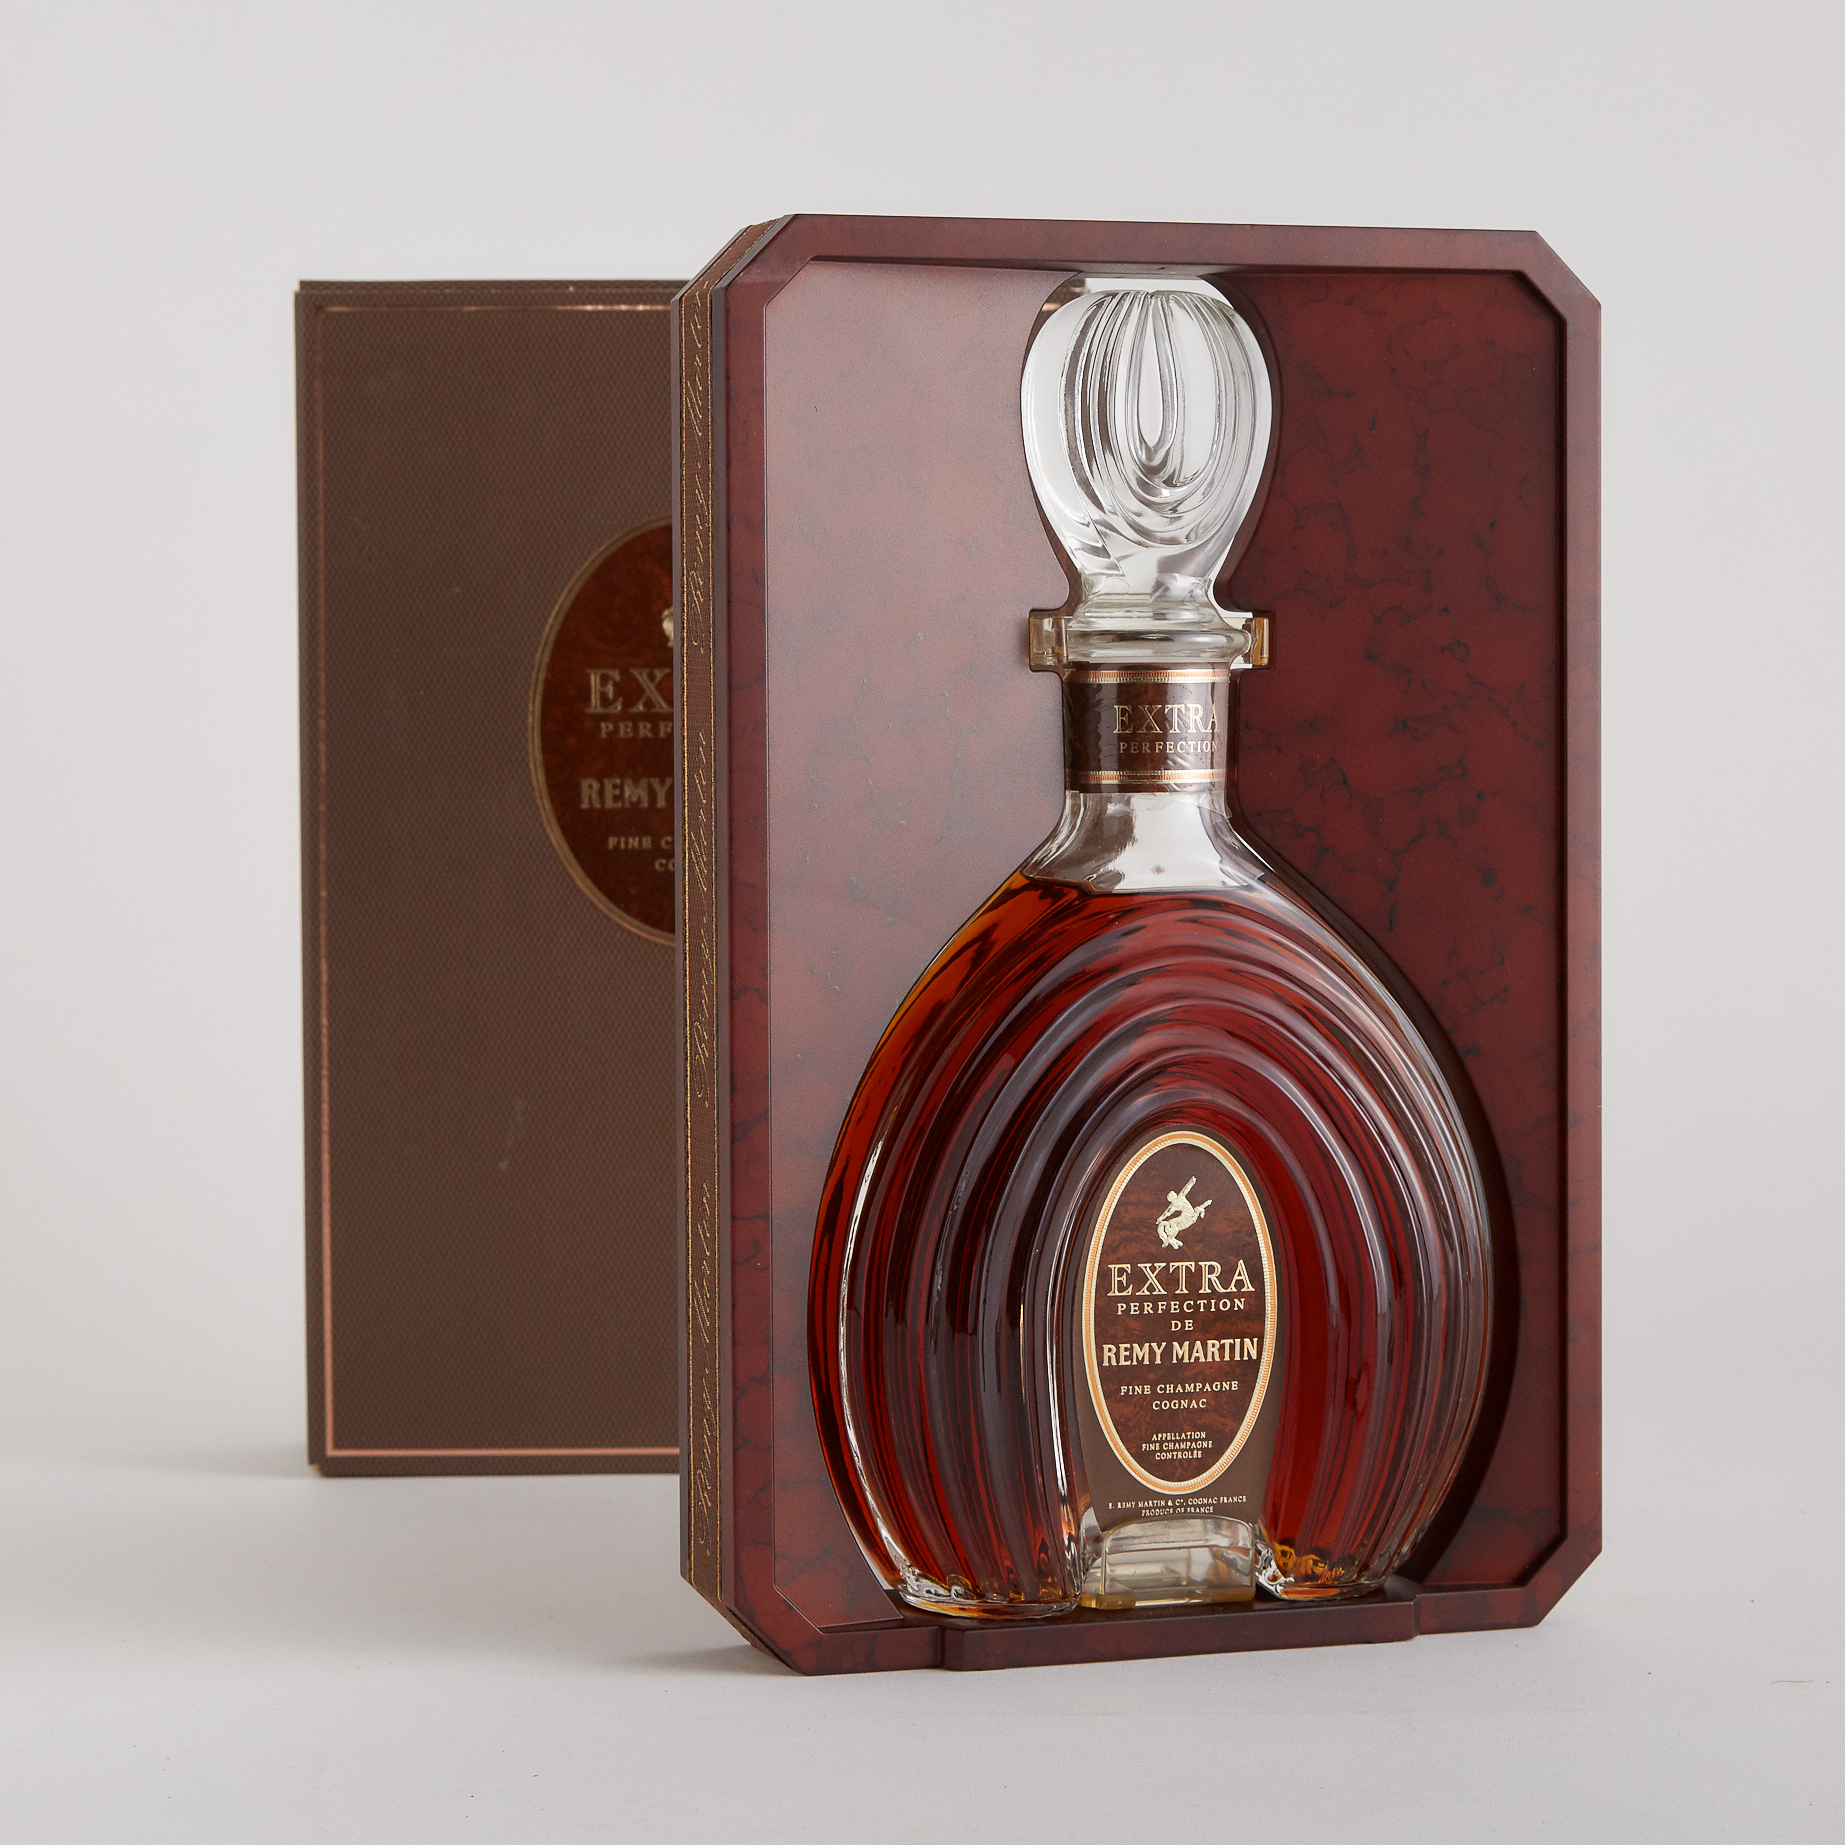 RÉMY MARTIN EXTRA PERFECTION FINE CHAMPAGNE COGNAC (ONE 0.7 L)